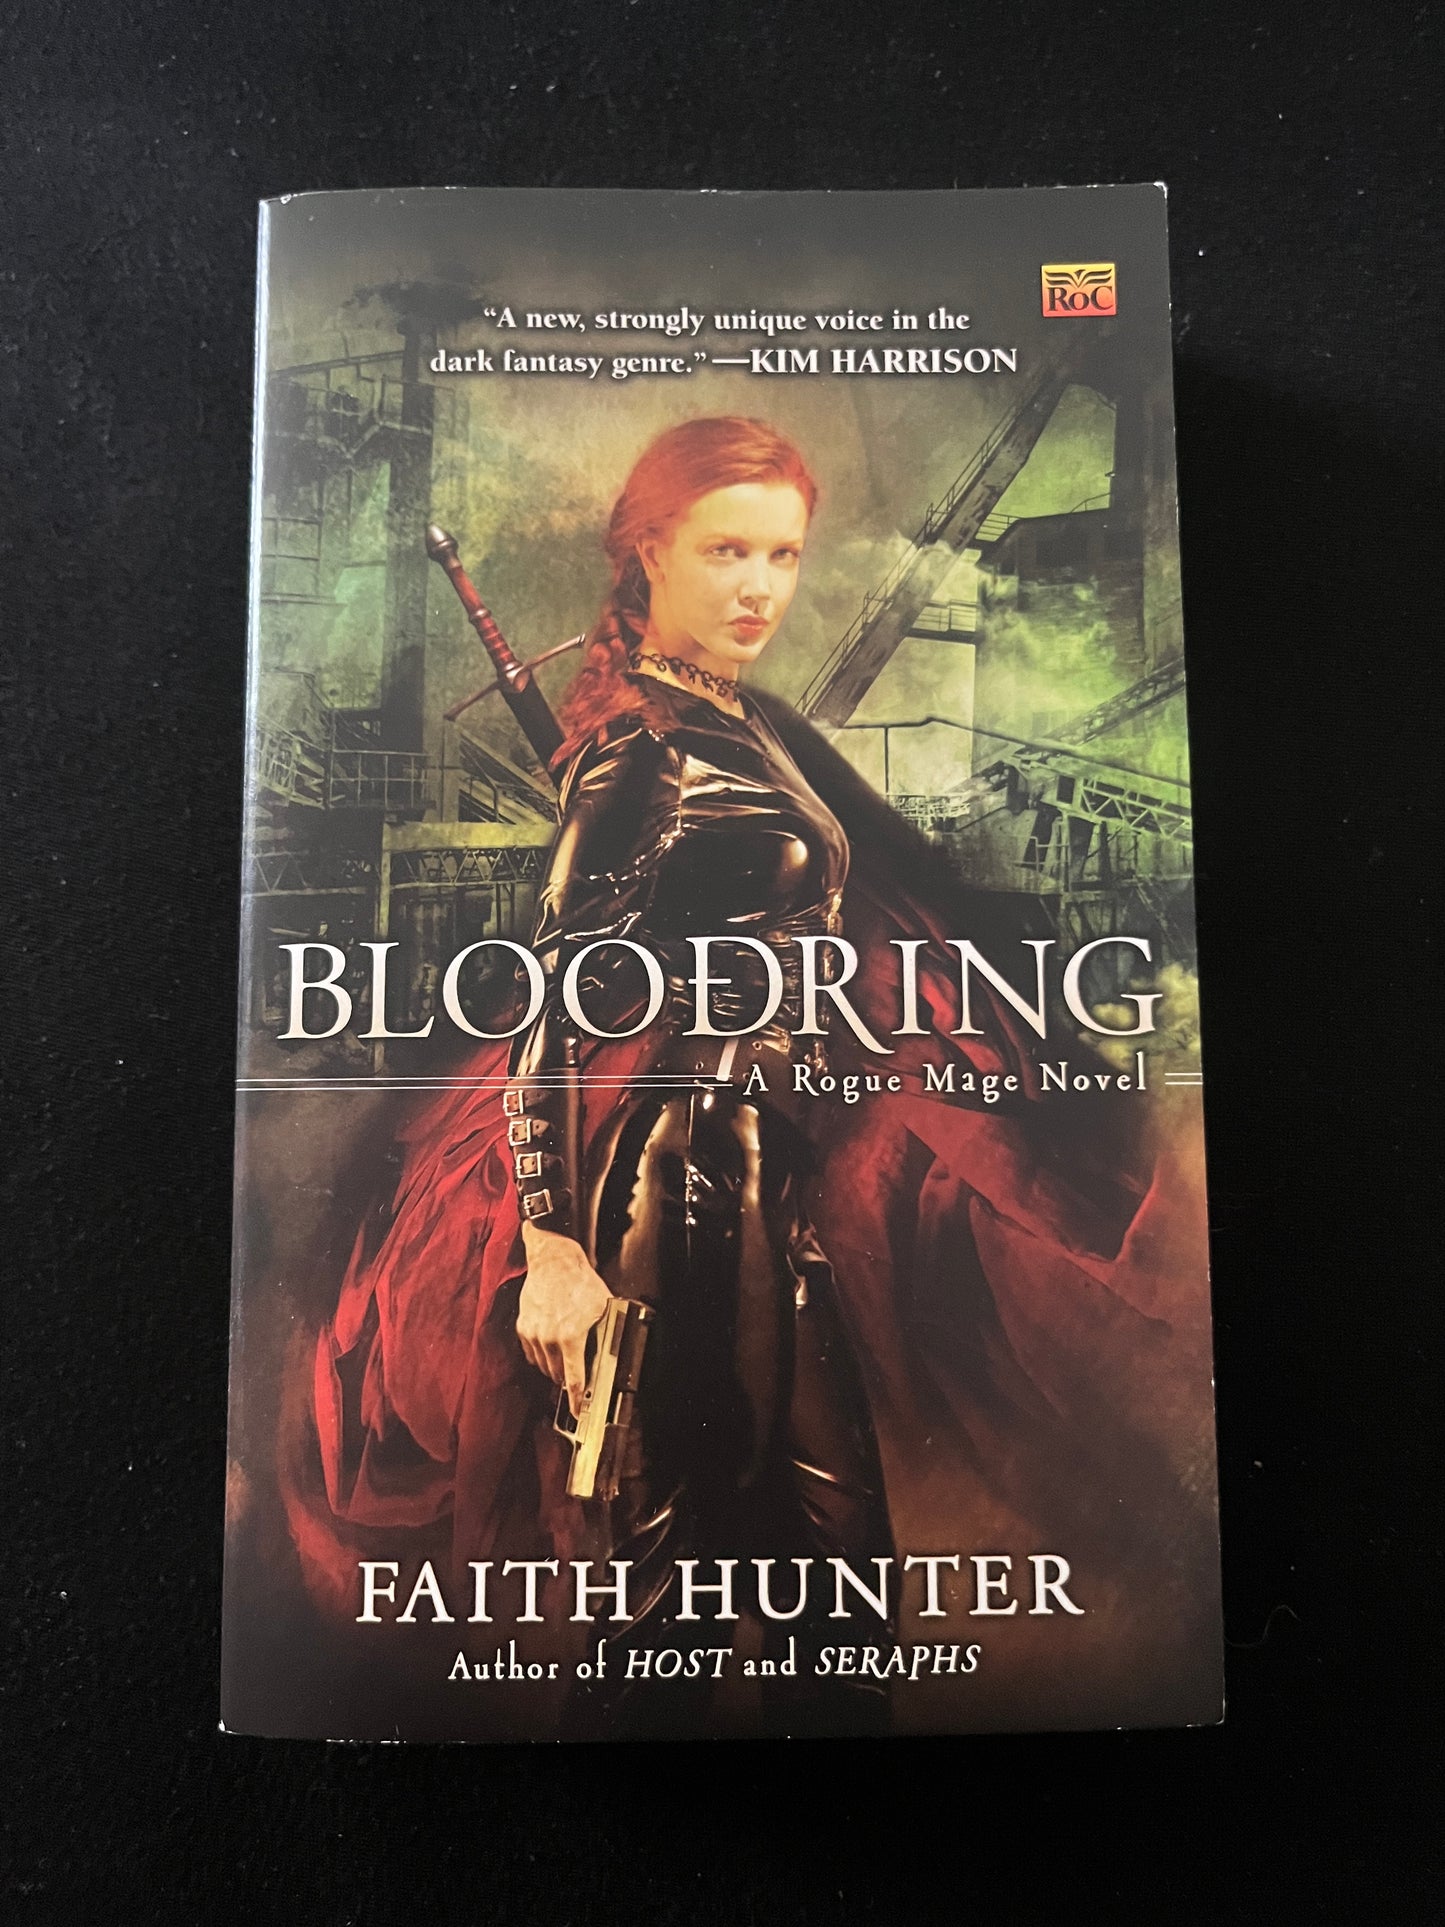 BLOODRING by Faith Hunter